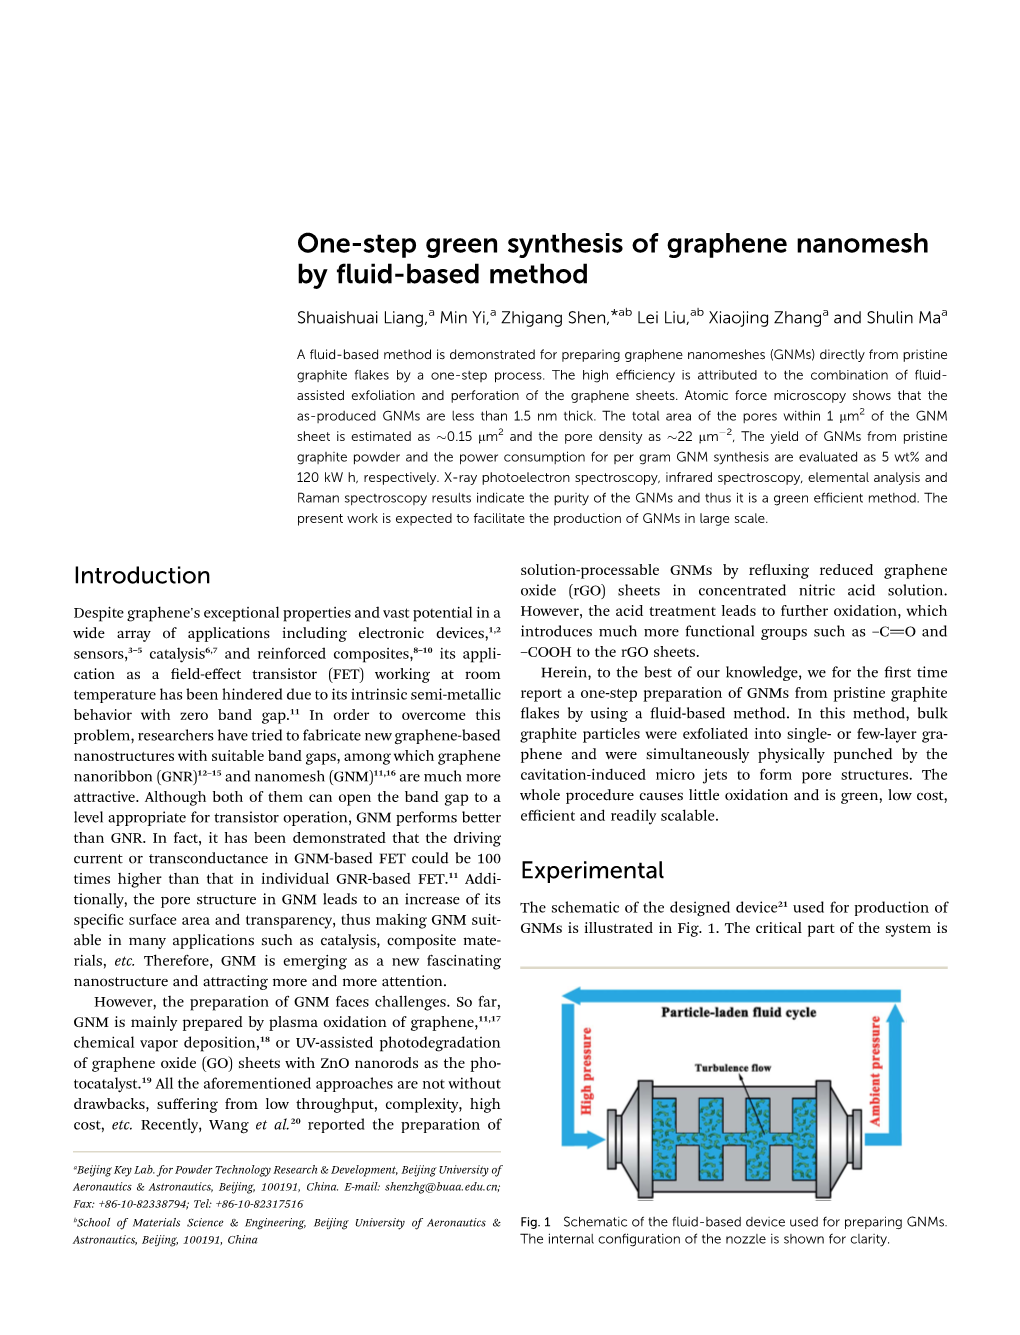 One-Step Green Synthesis of Graphene Nanomesh by Fluid-Based Method